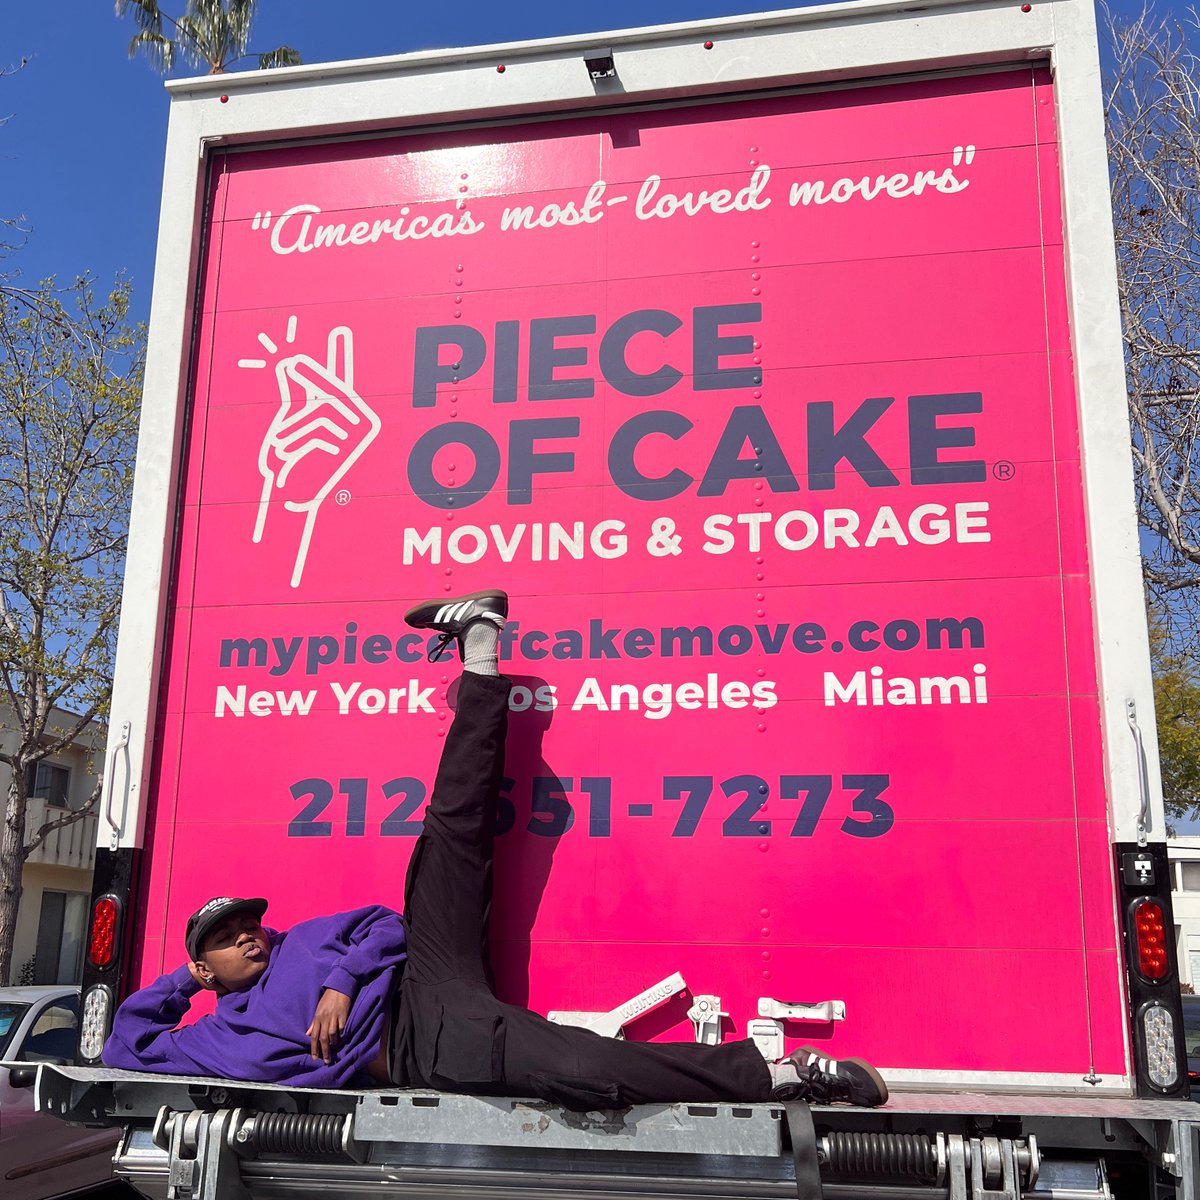 Stress free moving in LA 🌴 with California's most loved mover 🍰 

#customerreview #customertestimonial #moving #movingtips #mypieceofcakemove #whitegloveservice #localmovers #pieceofcakemoving #losangeles #movinglosangeles #movingla #losangeles movers #lamovers